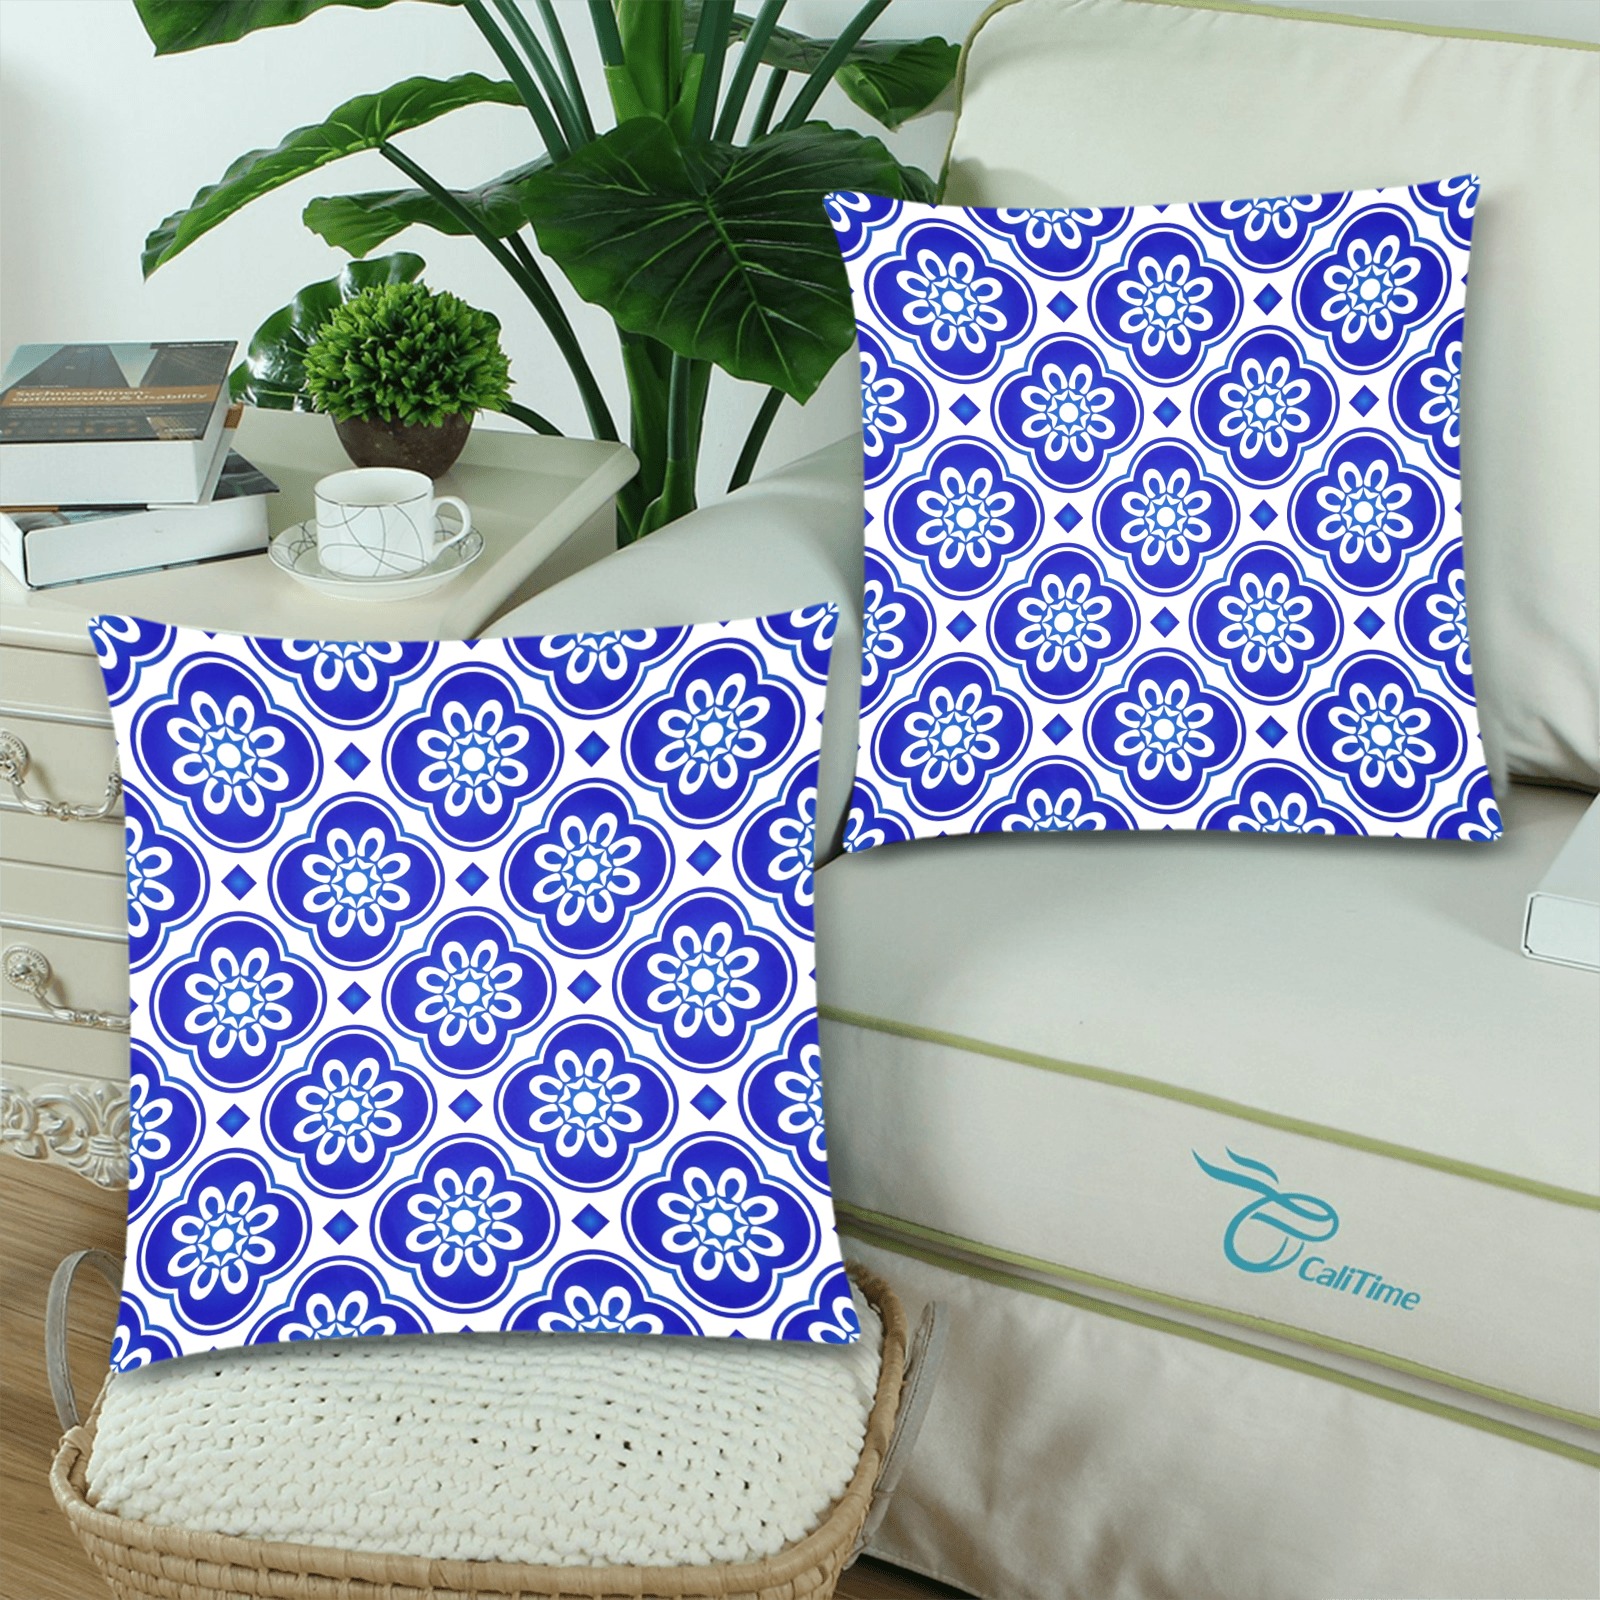 Decorative Blue and White Floral Abstract Custom Zippered Pillow Cases 18"x 18" (Twin Sides) (Set of 2)